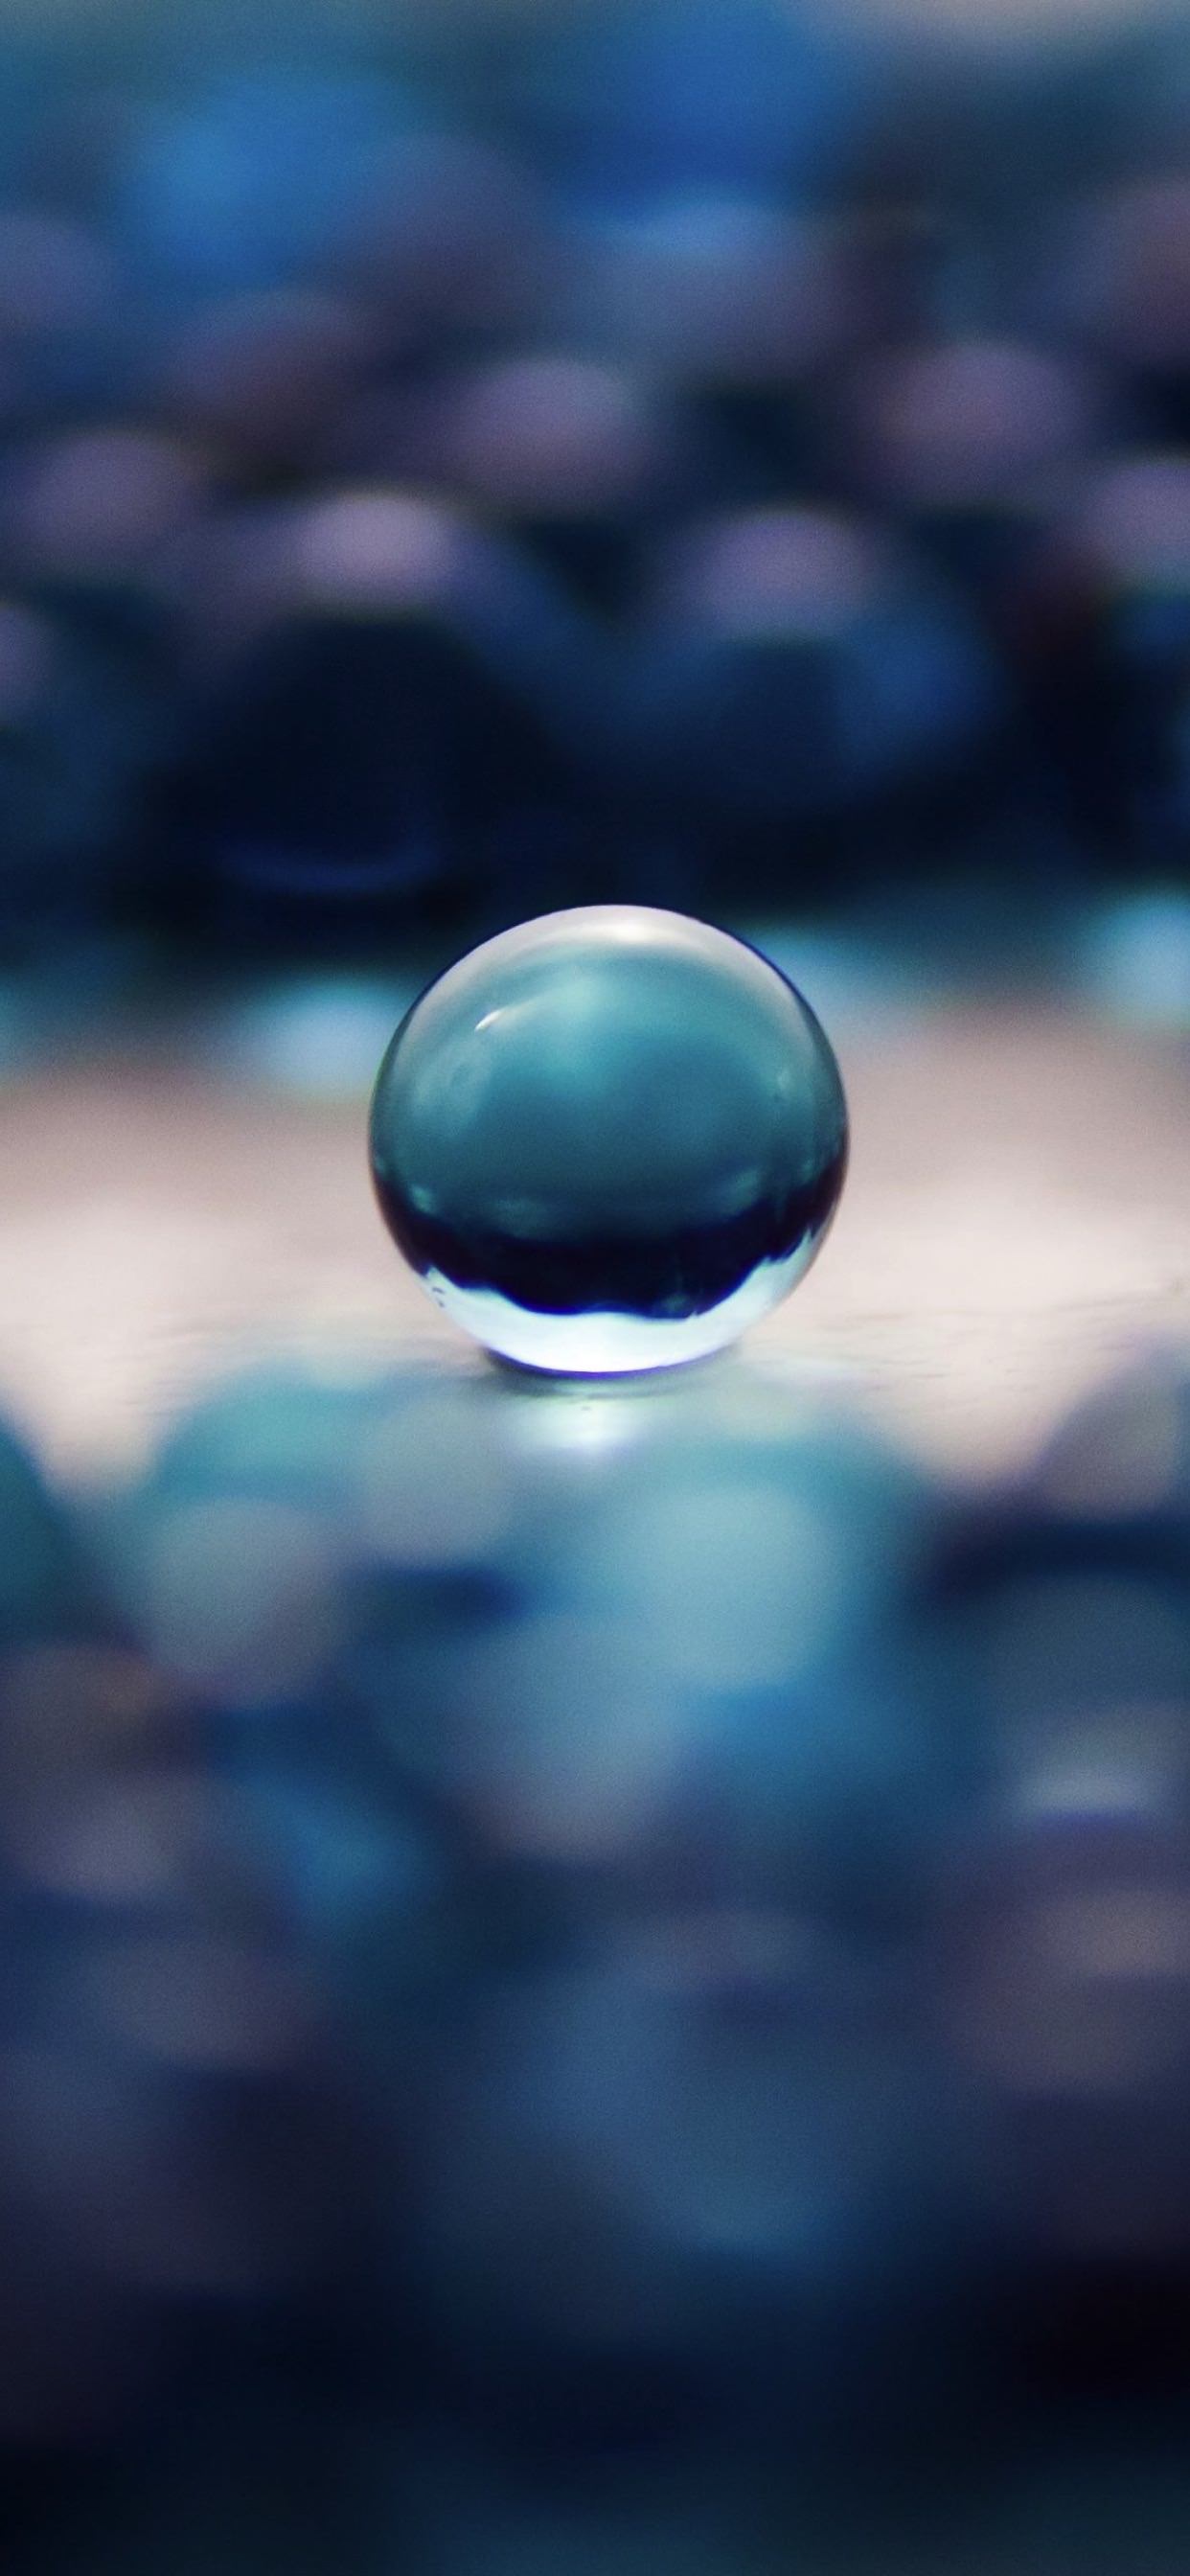 Cool Marbles blue | wallpaper.sc iPhone XS Max